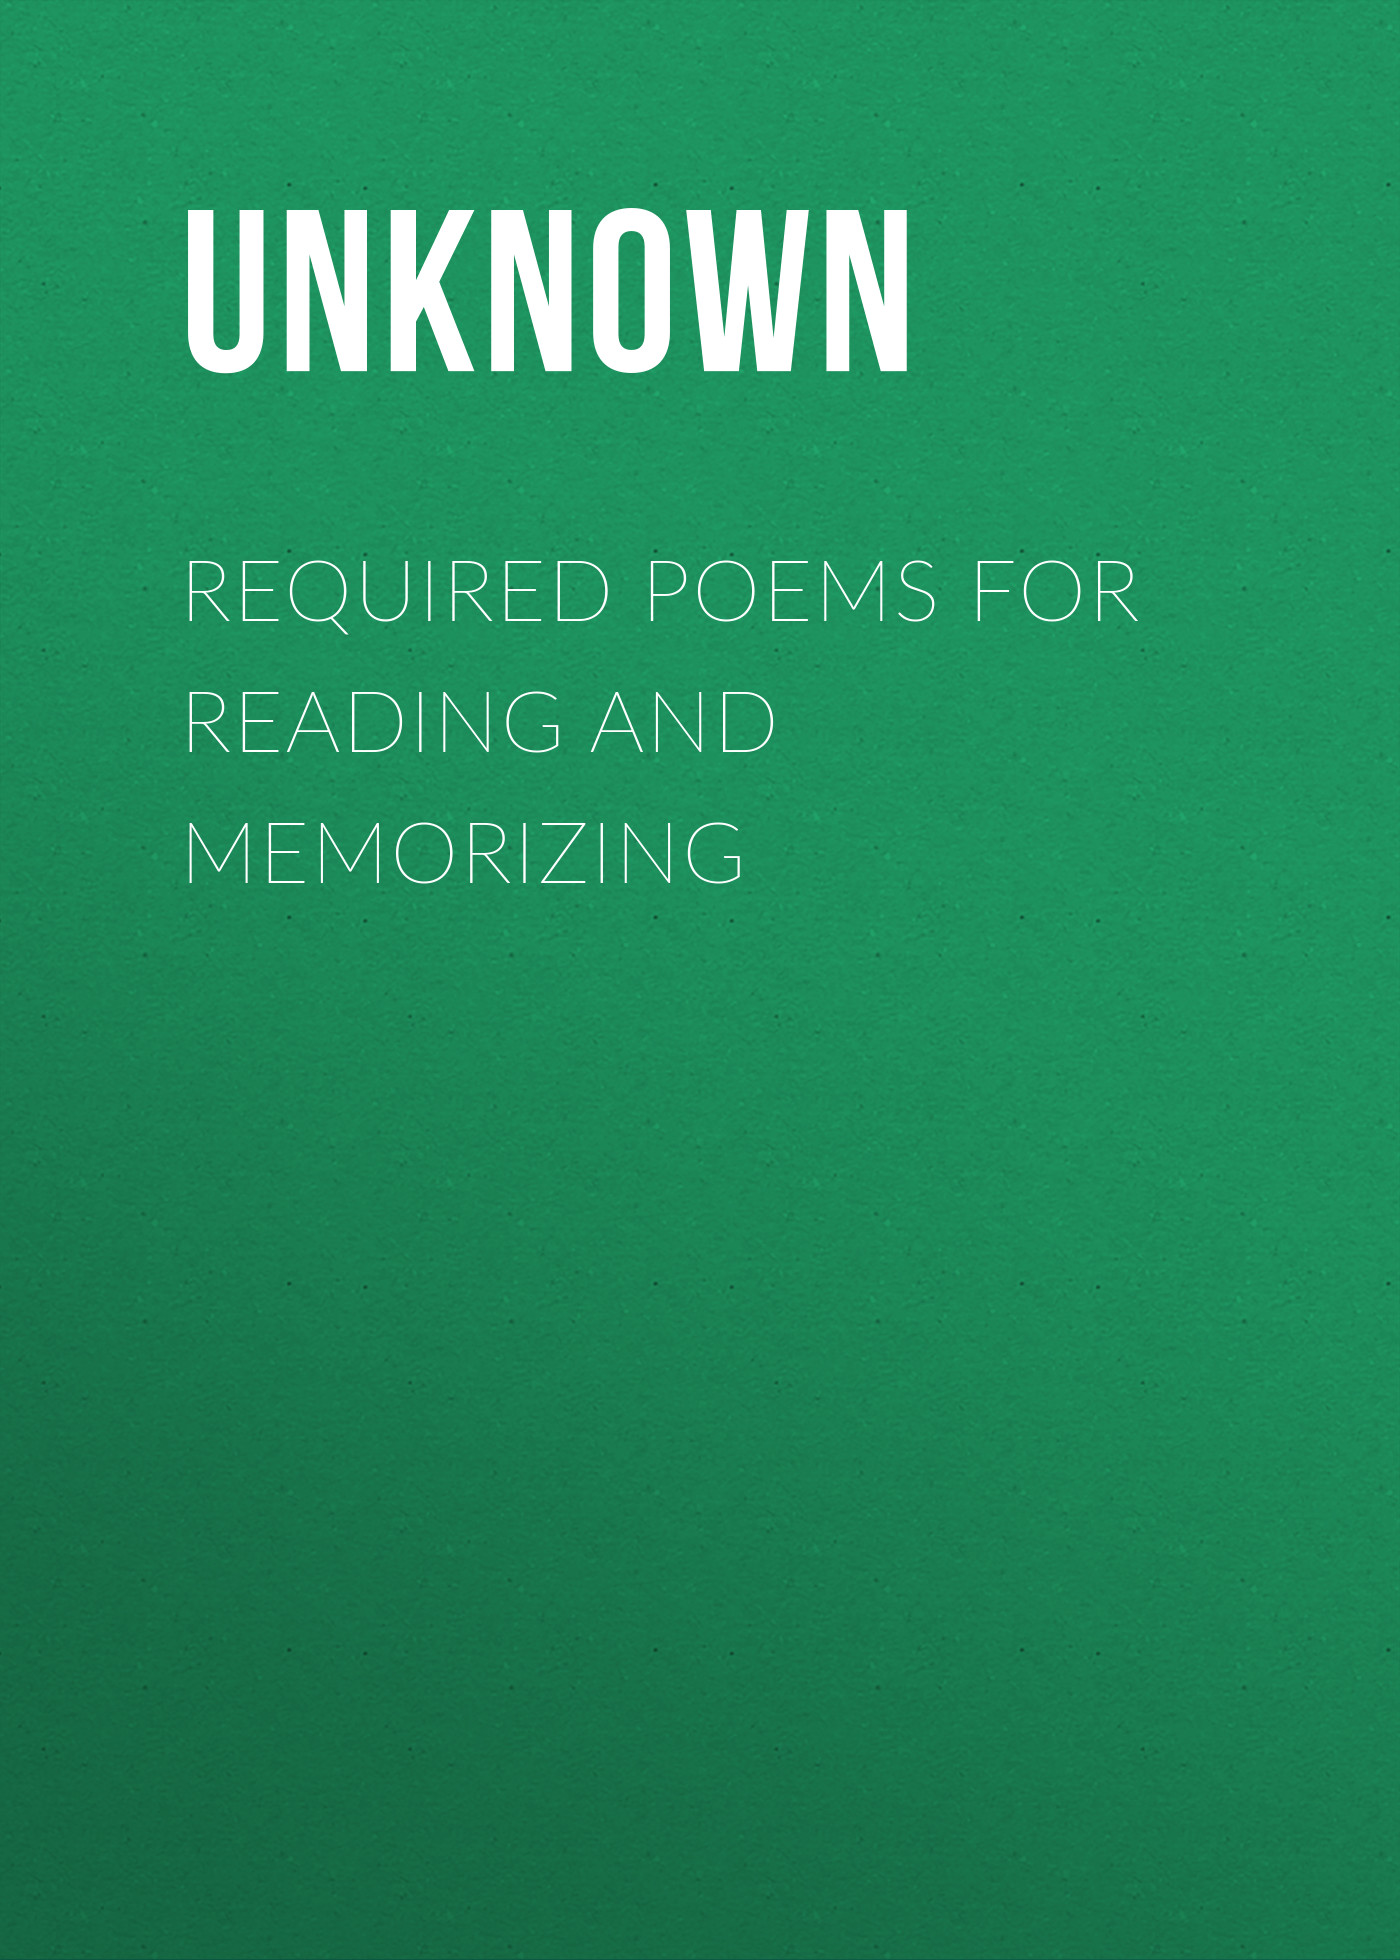 Required Poems for Reading and Memorizing